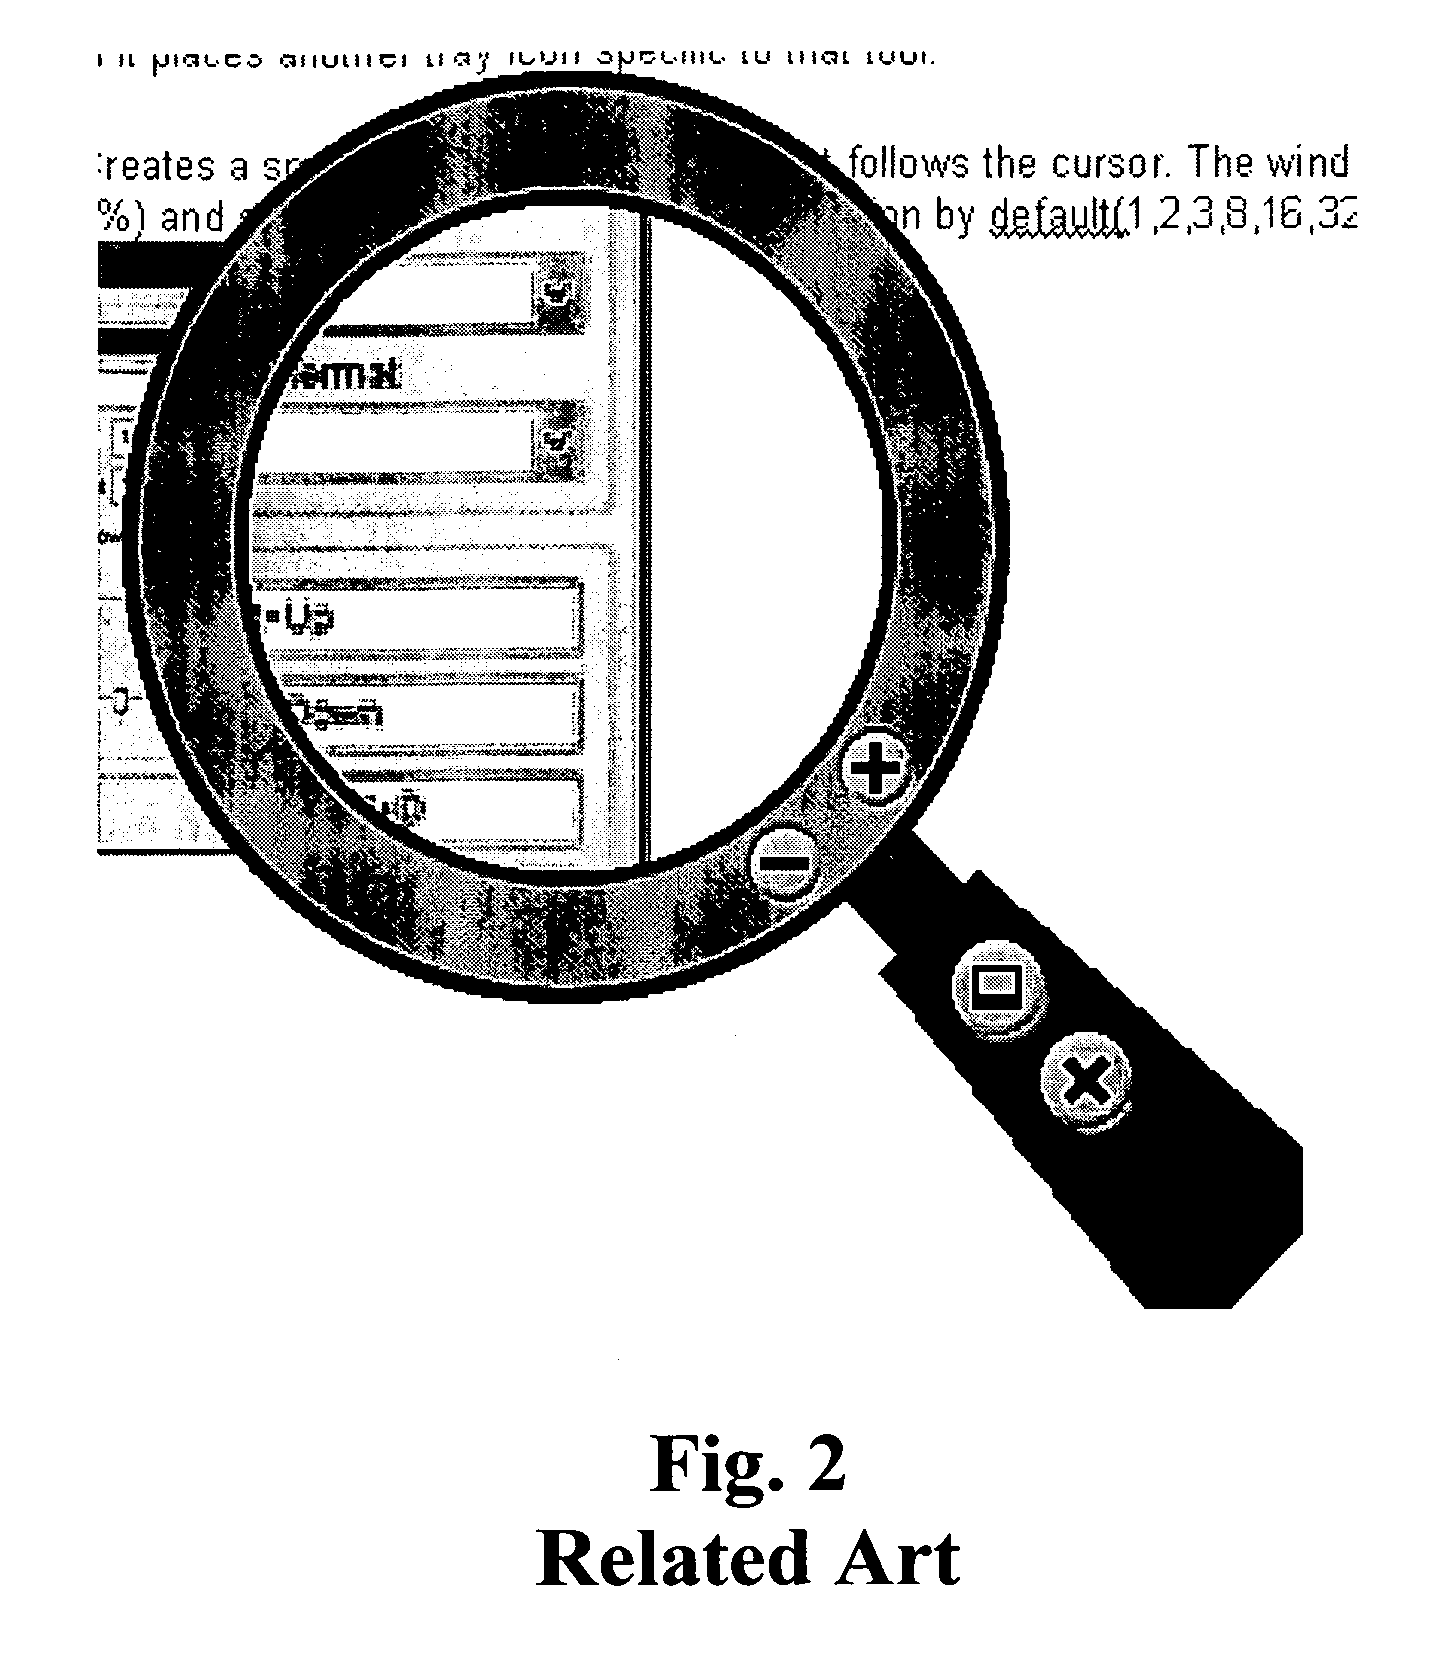 Virtual magnifying glass with intuitive use enhancements